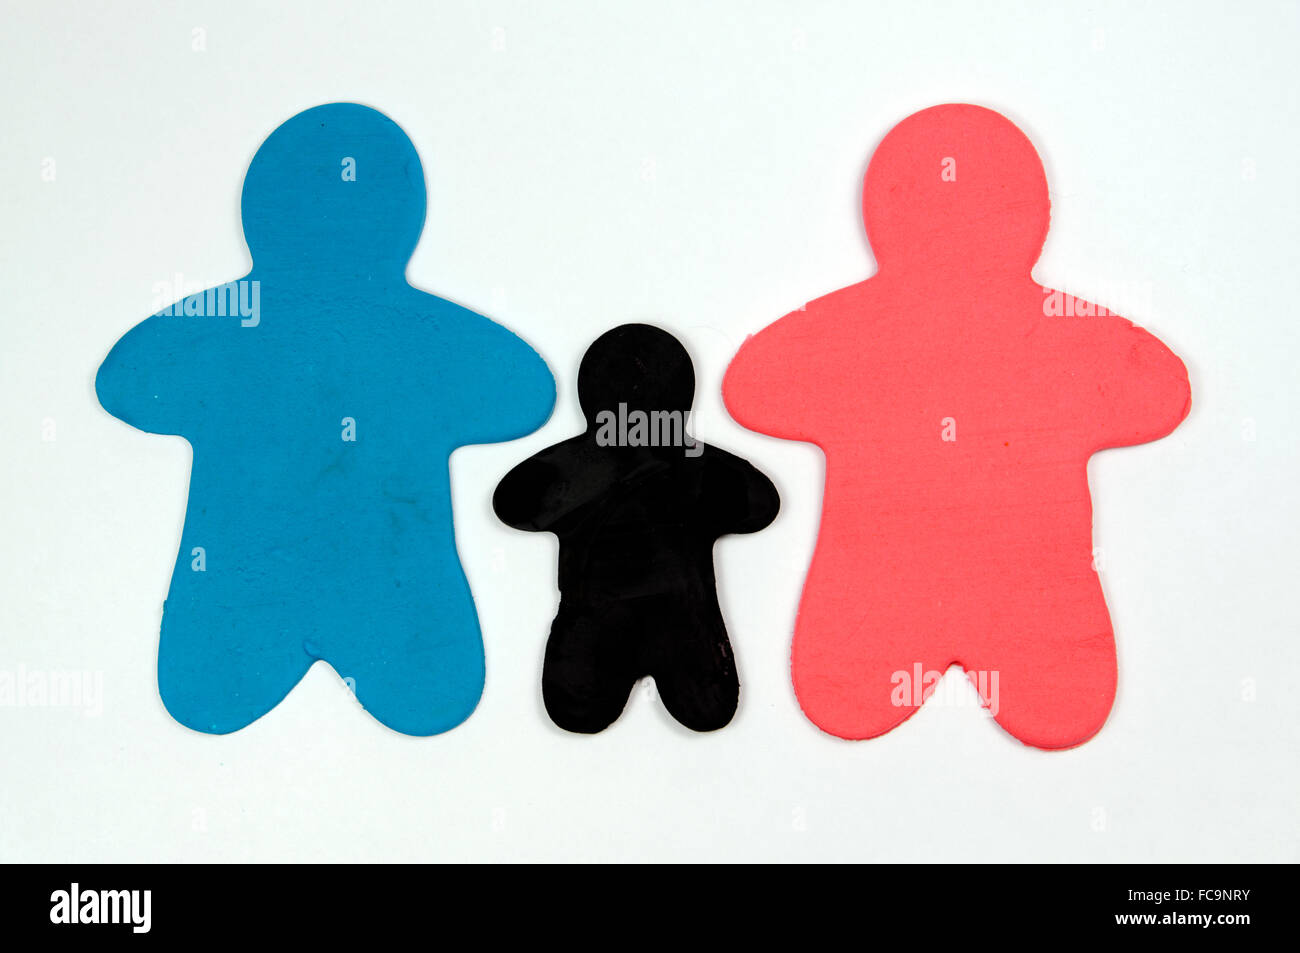 Family figures made from Play-doh. Stock Photo